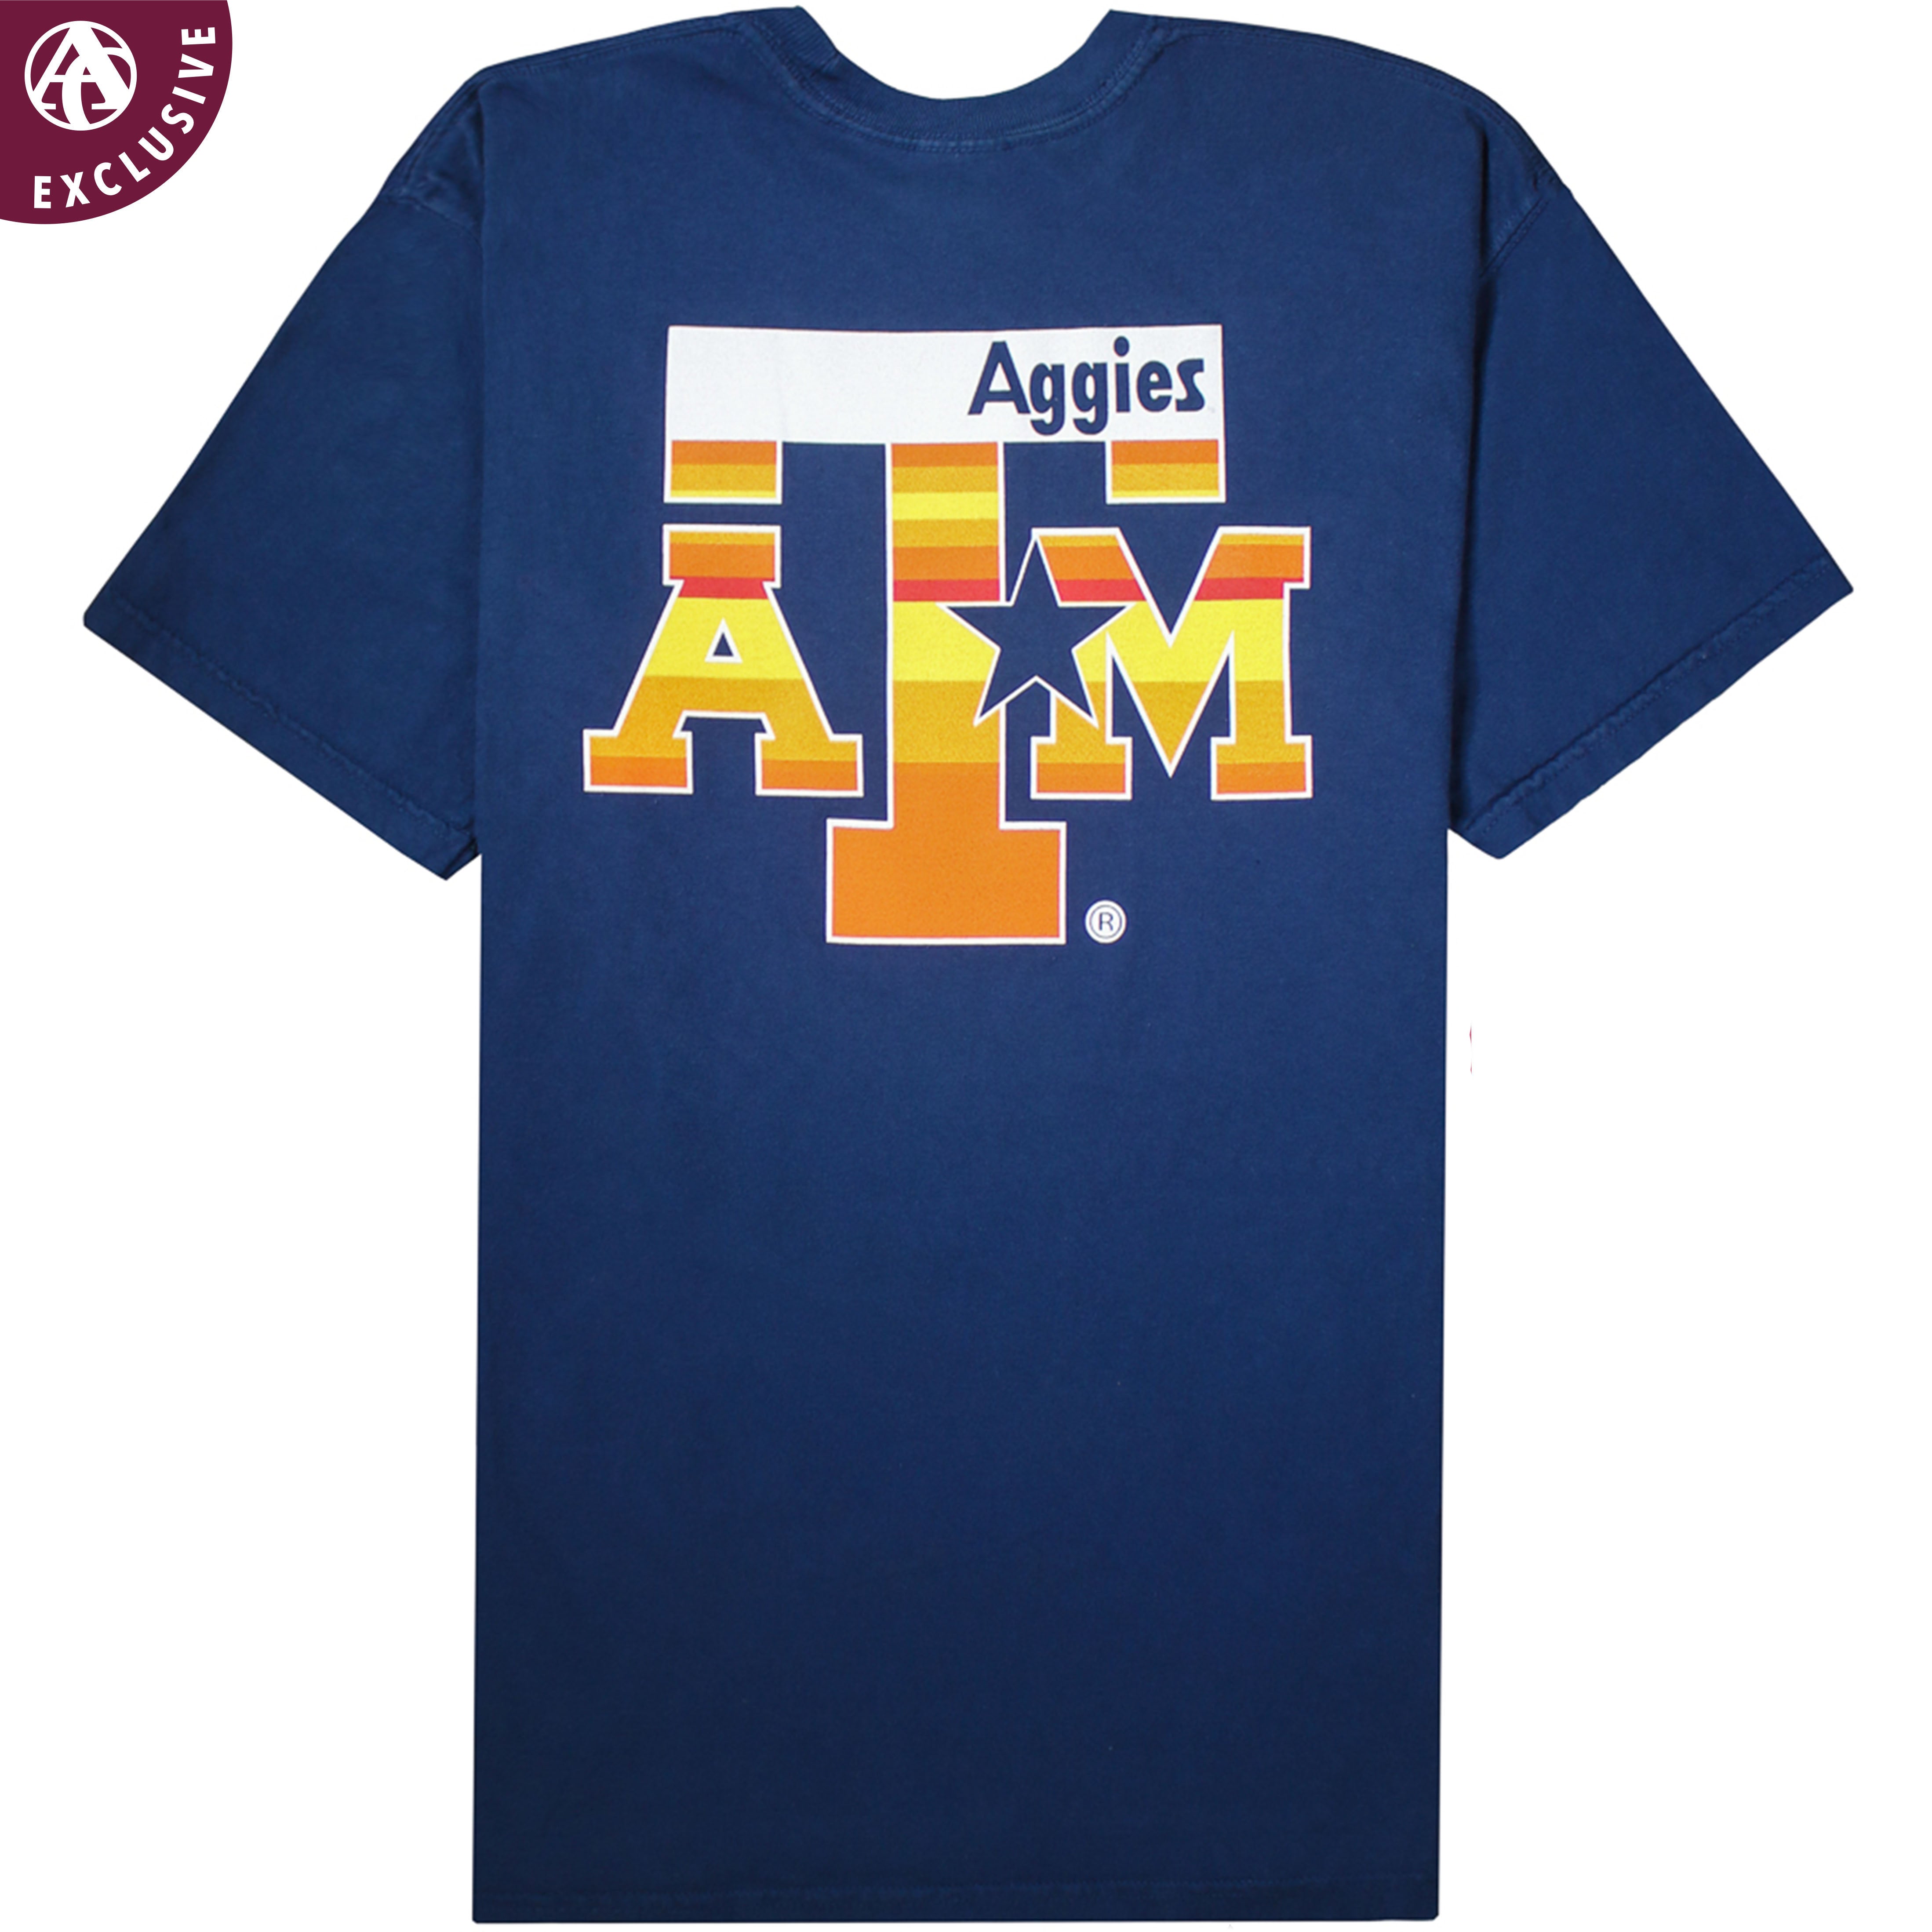 Multi Color Blue And Orange ATM Star Tee